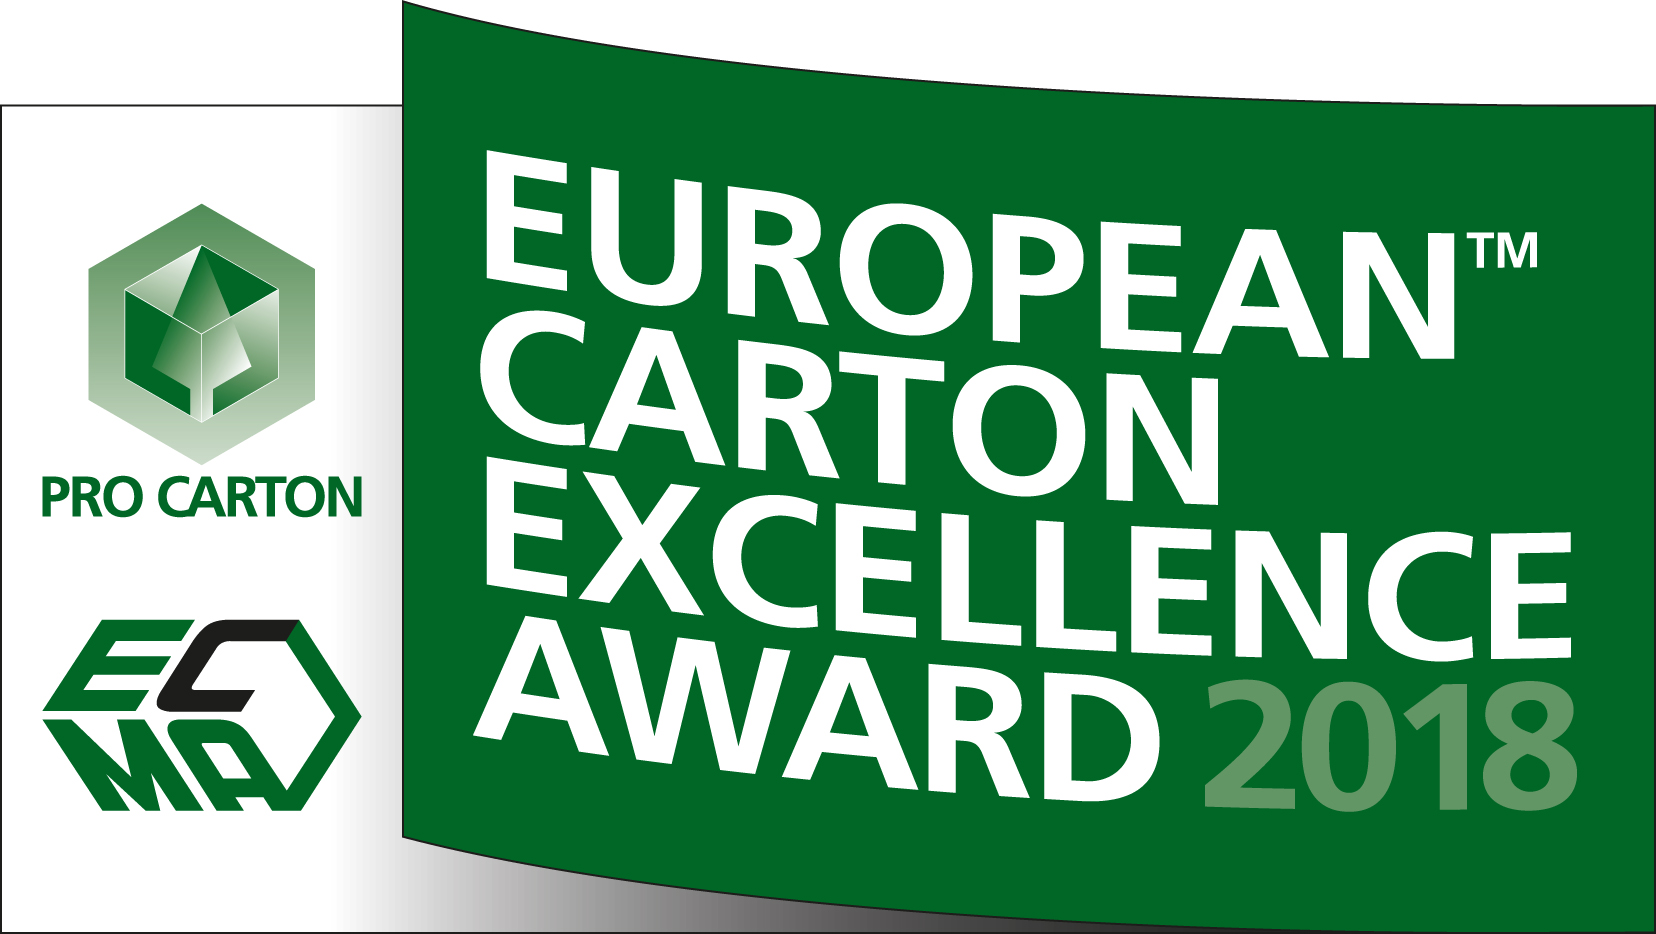 Be part of Europe's best - European Carton Excellence Award 2018 